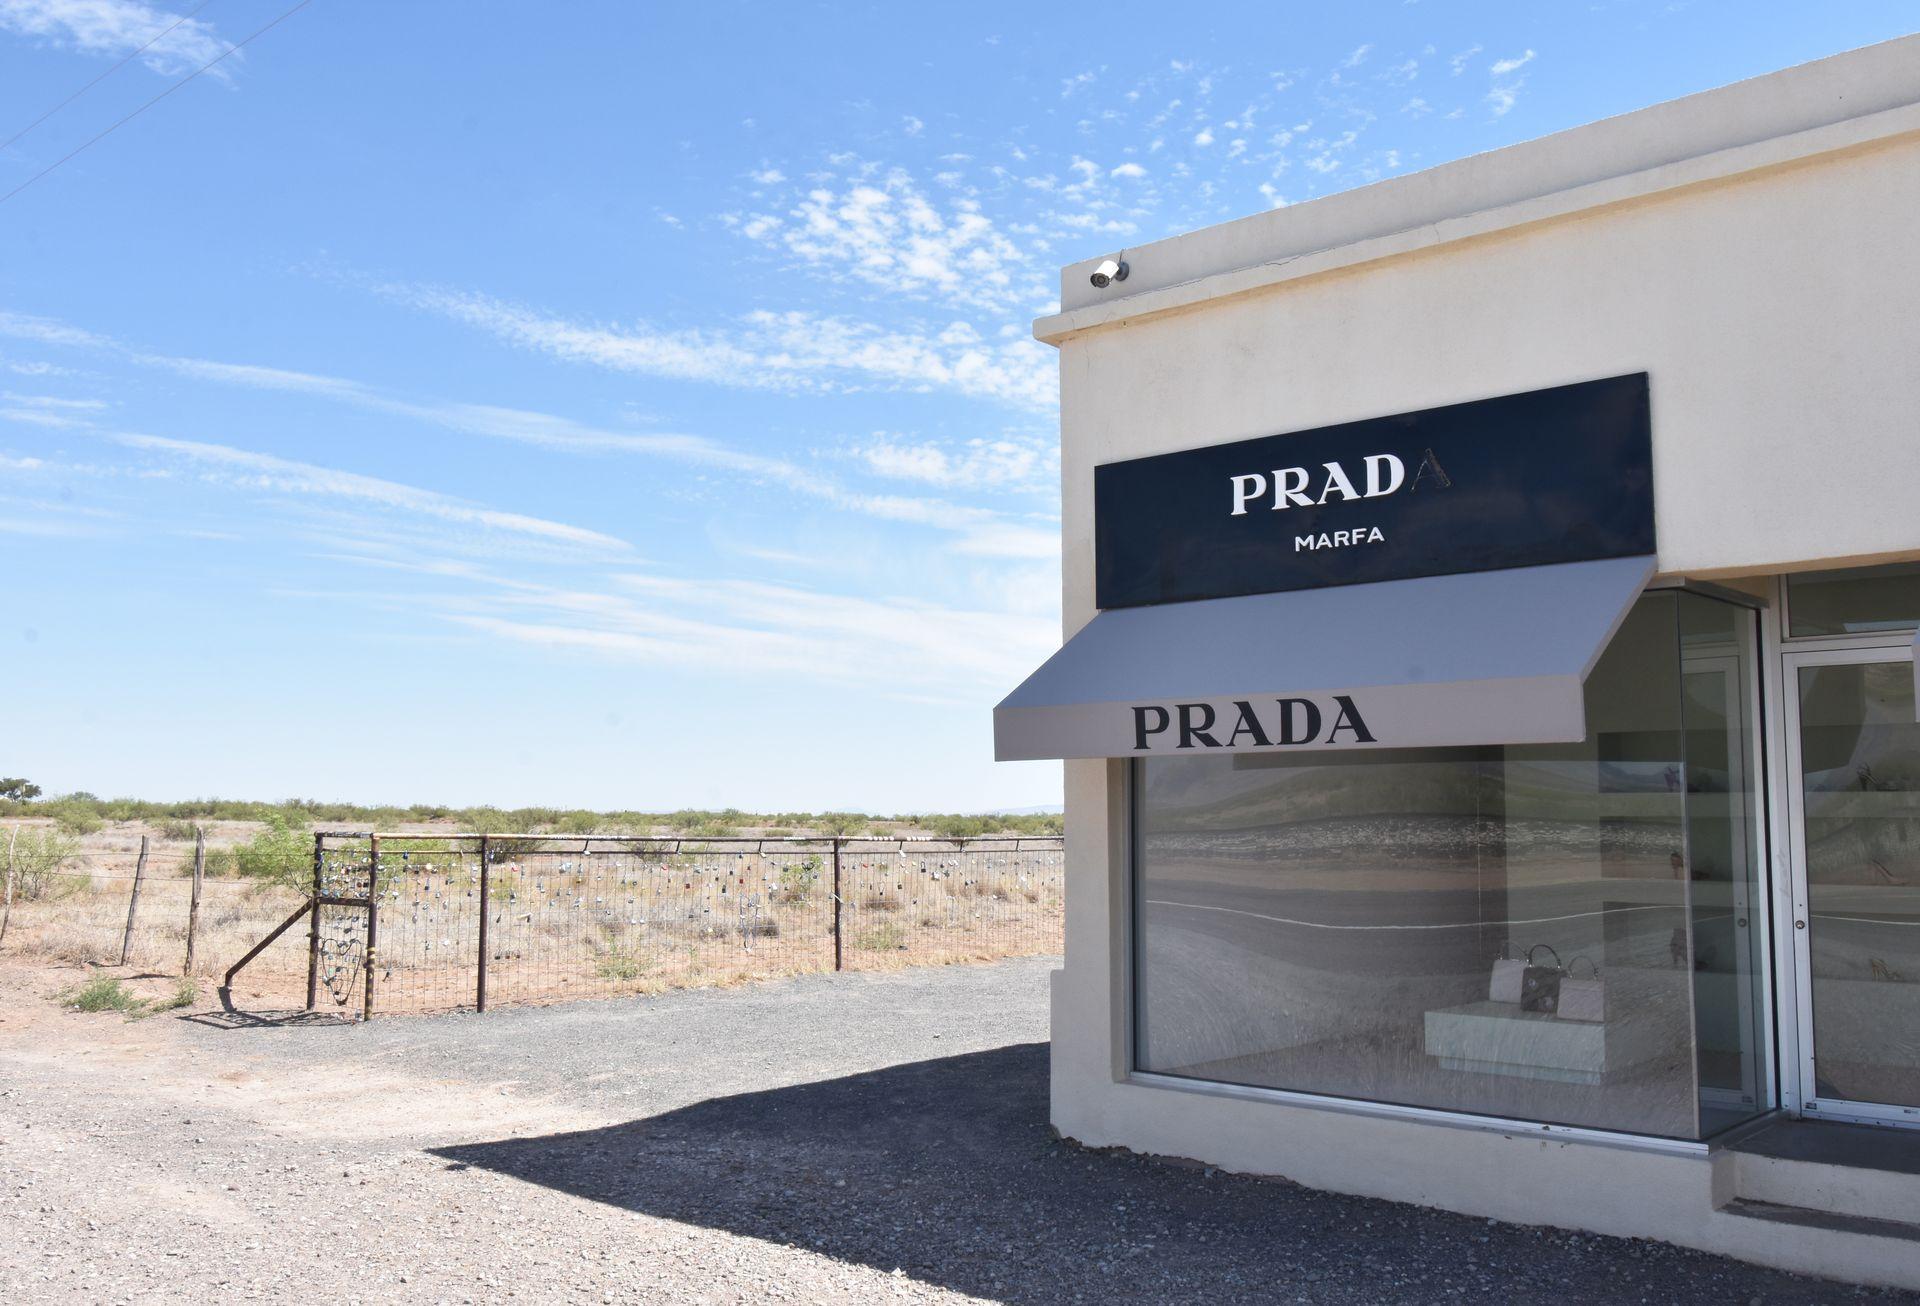 A Prada Store next to a fence with locks, with the desert in the background.